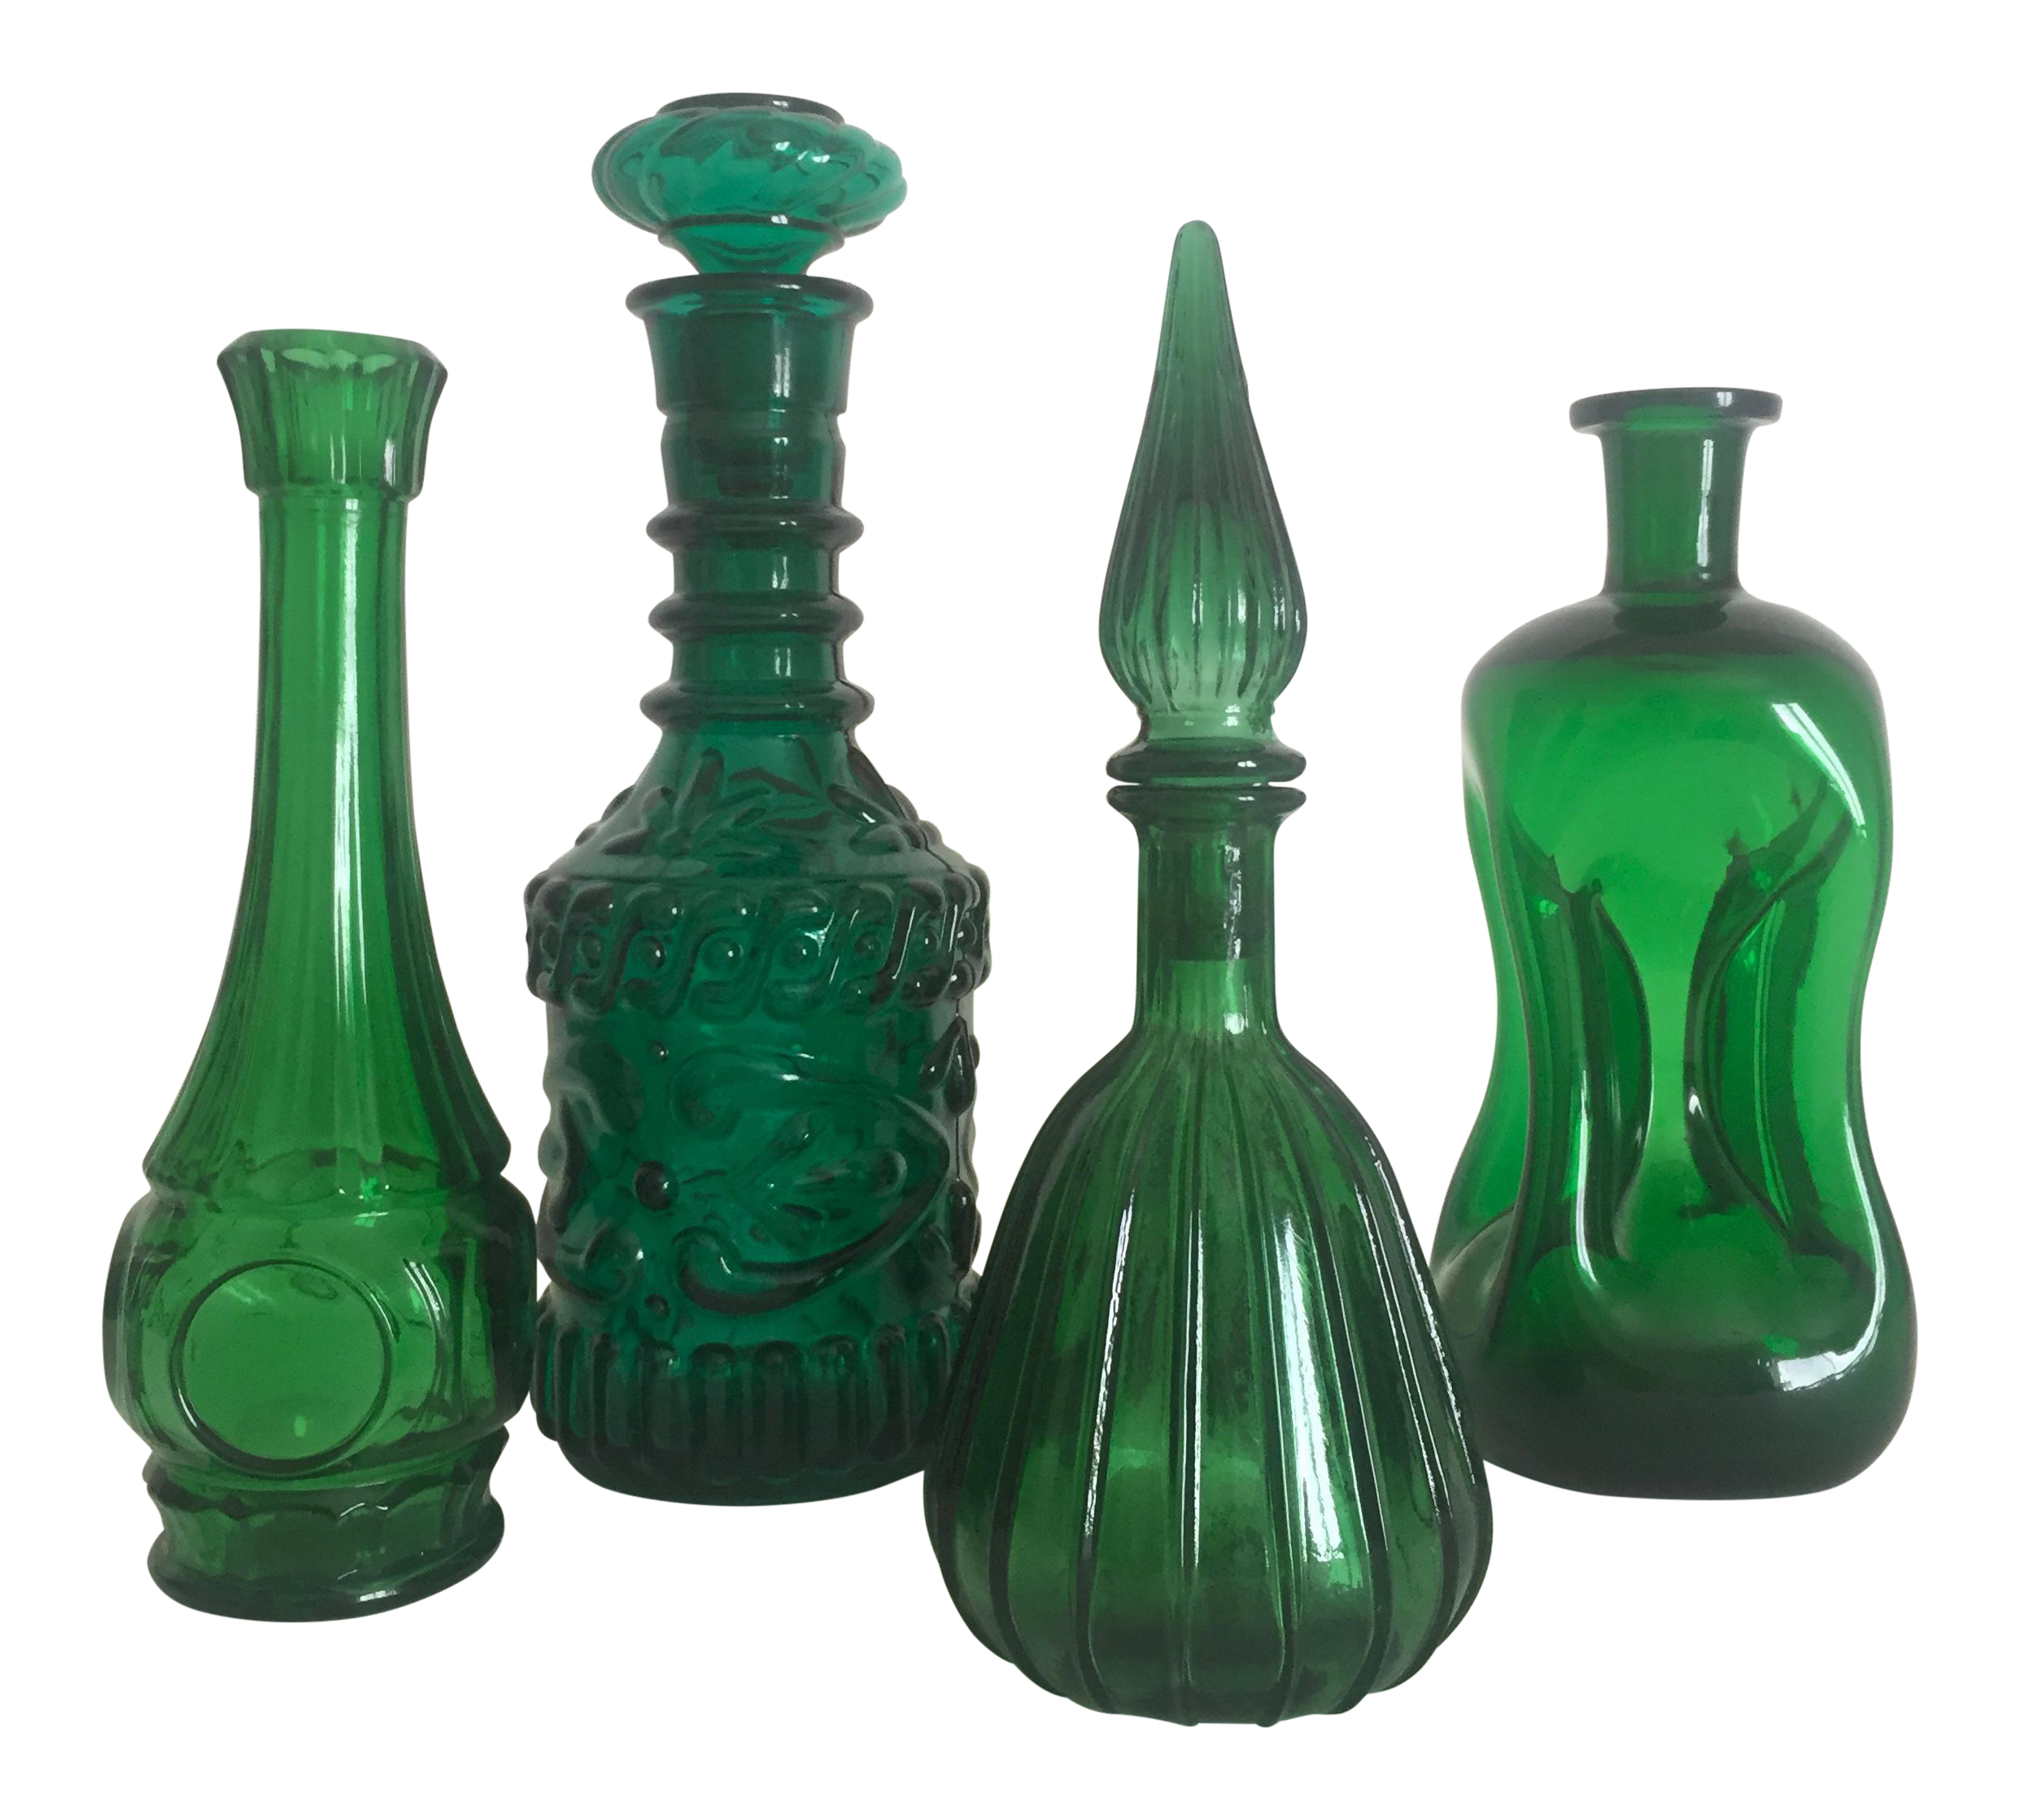 Vintage Mid-Century Modern Collected Green Glass Bottles - Set of 4 ...